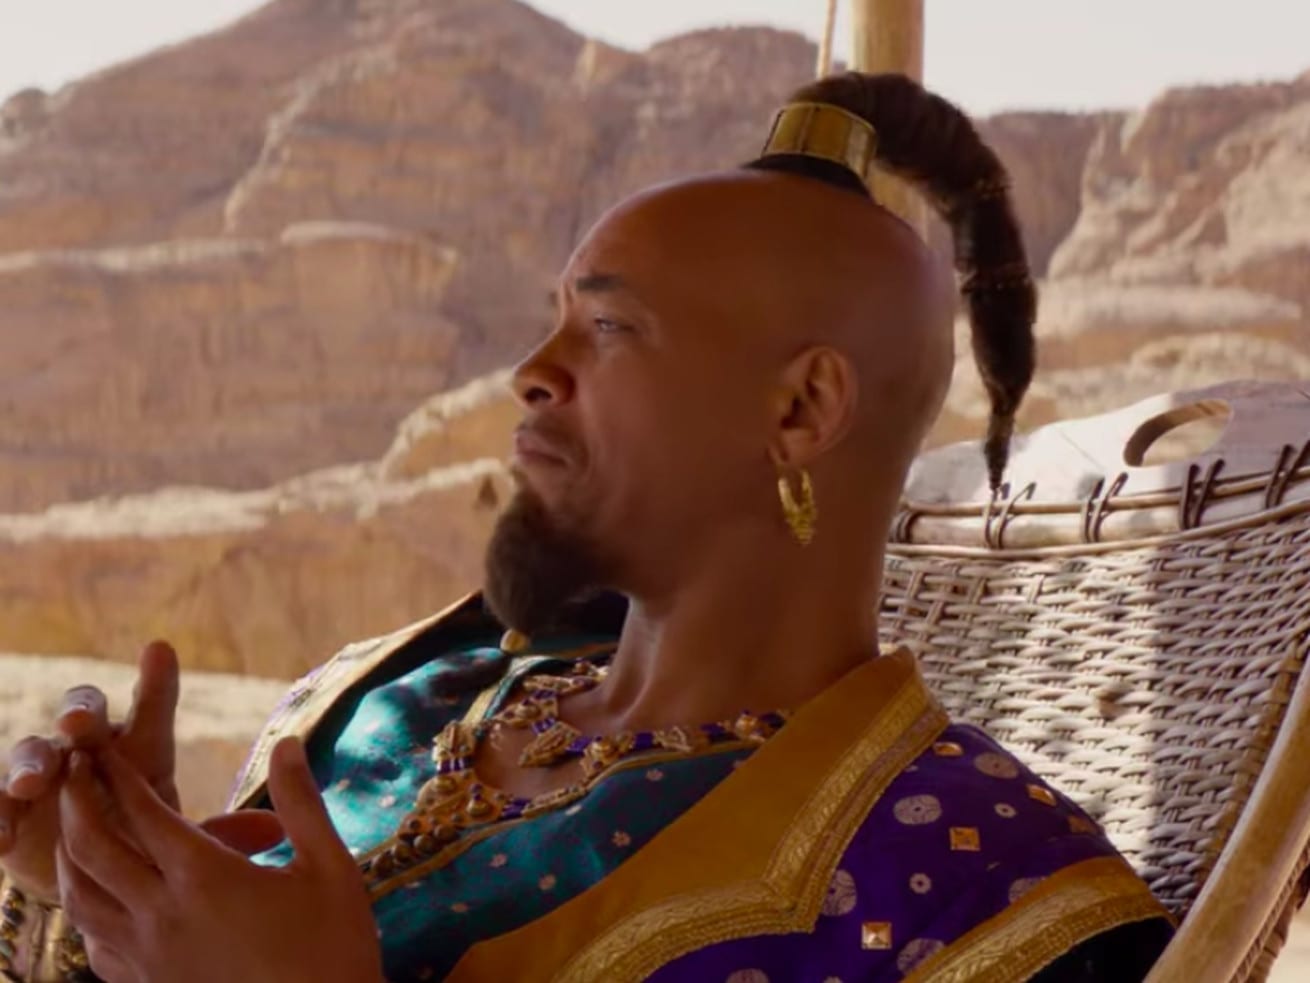 The first full trailer for Disney’s live-action Aladdin had so many hurdles to overcome